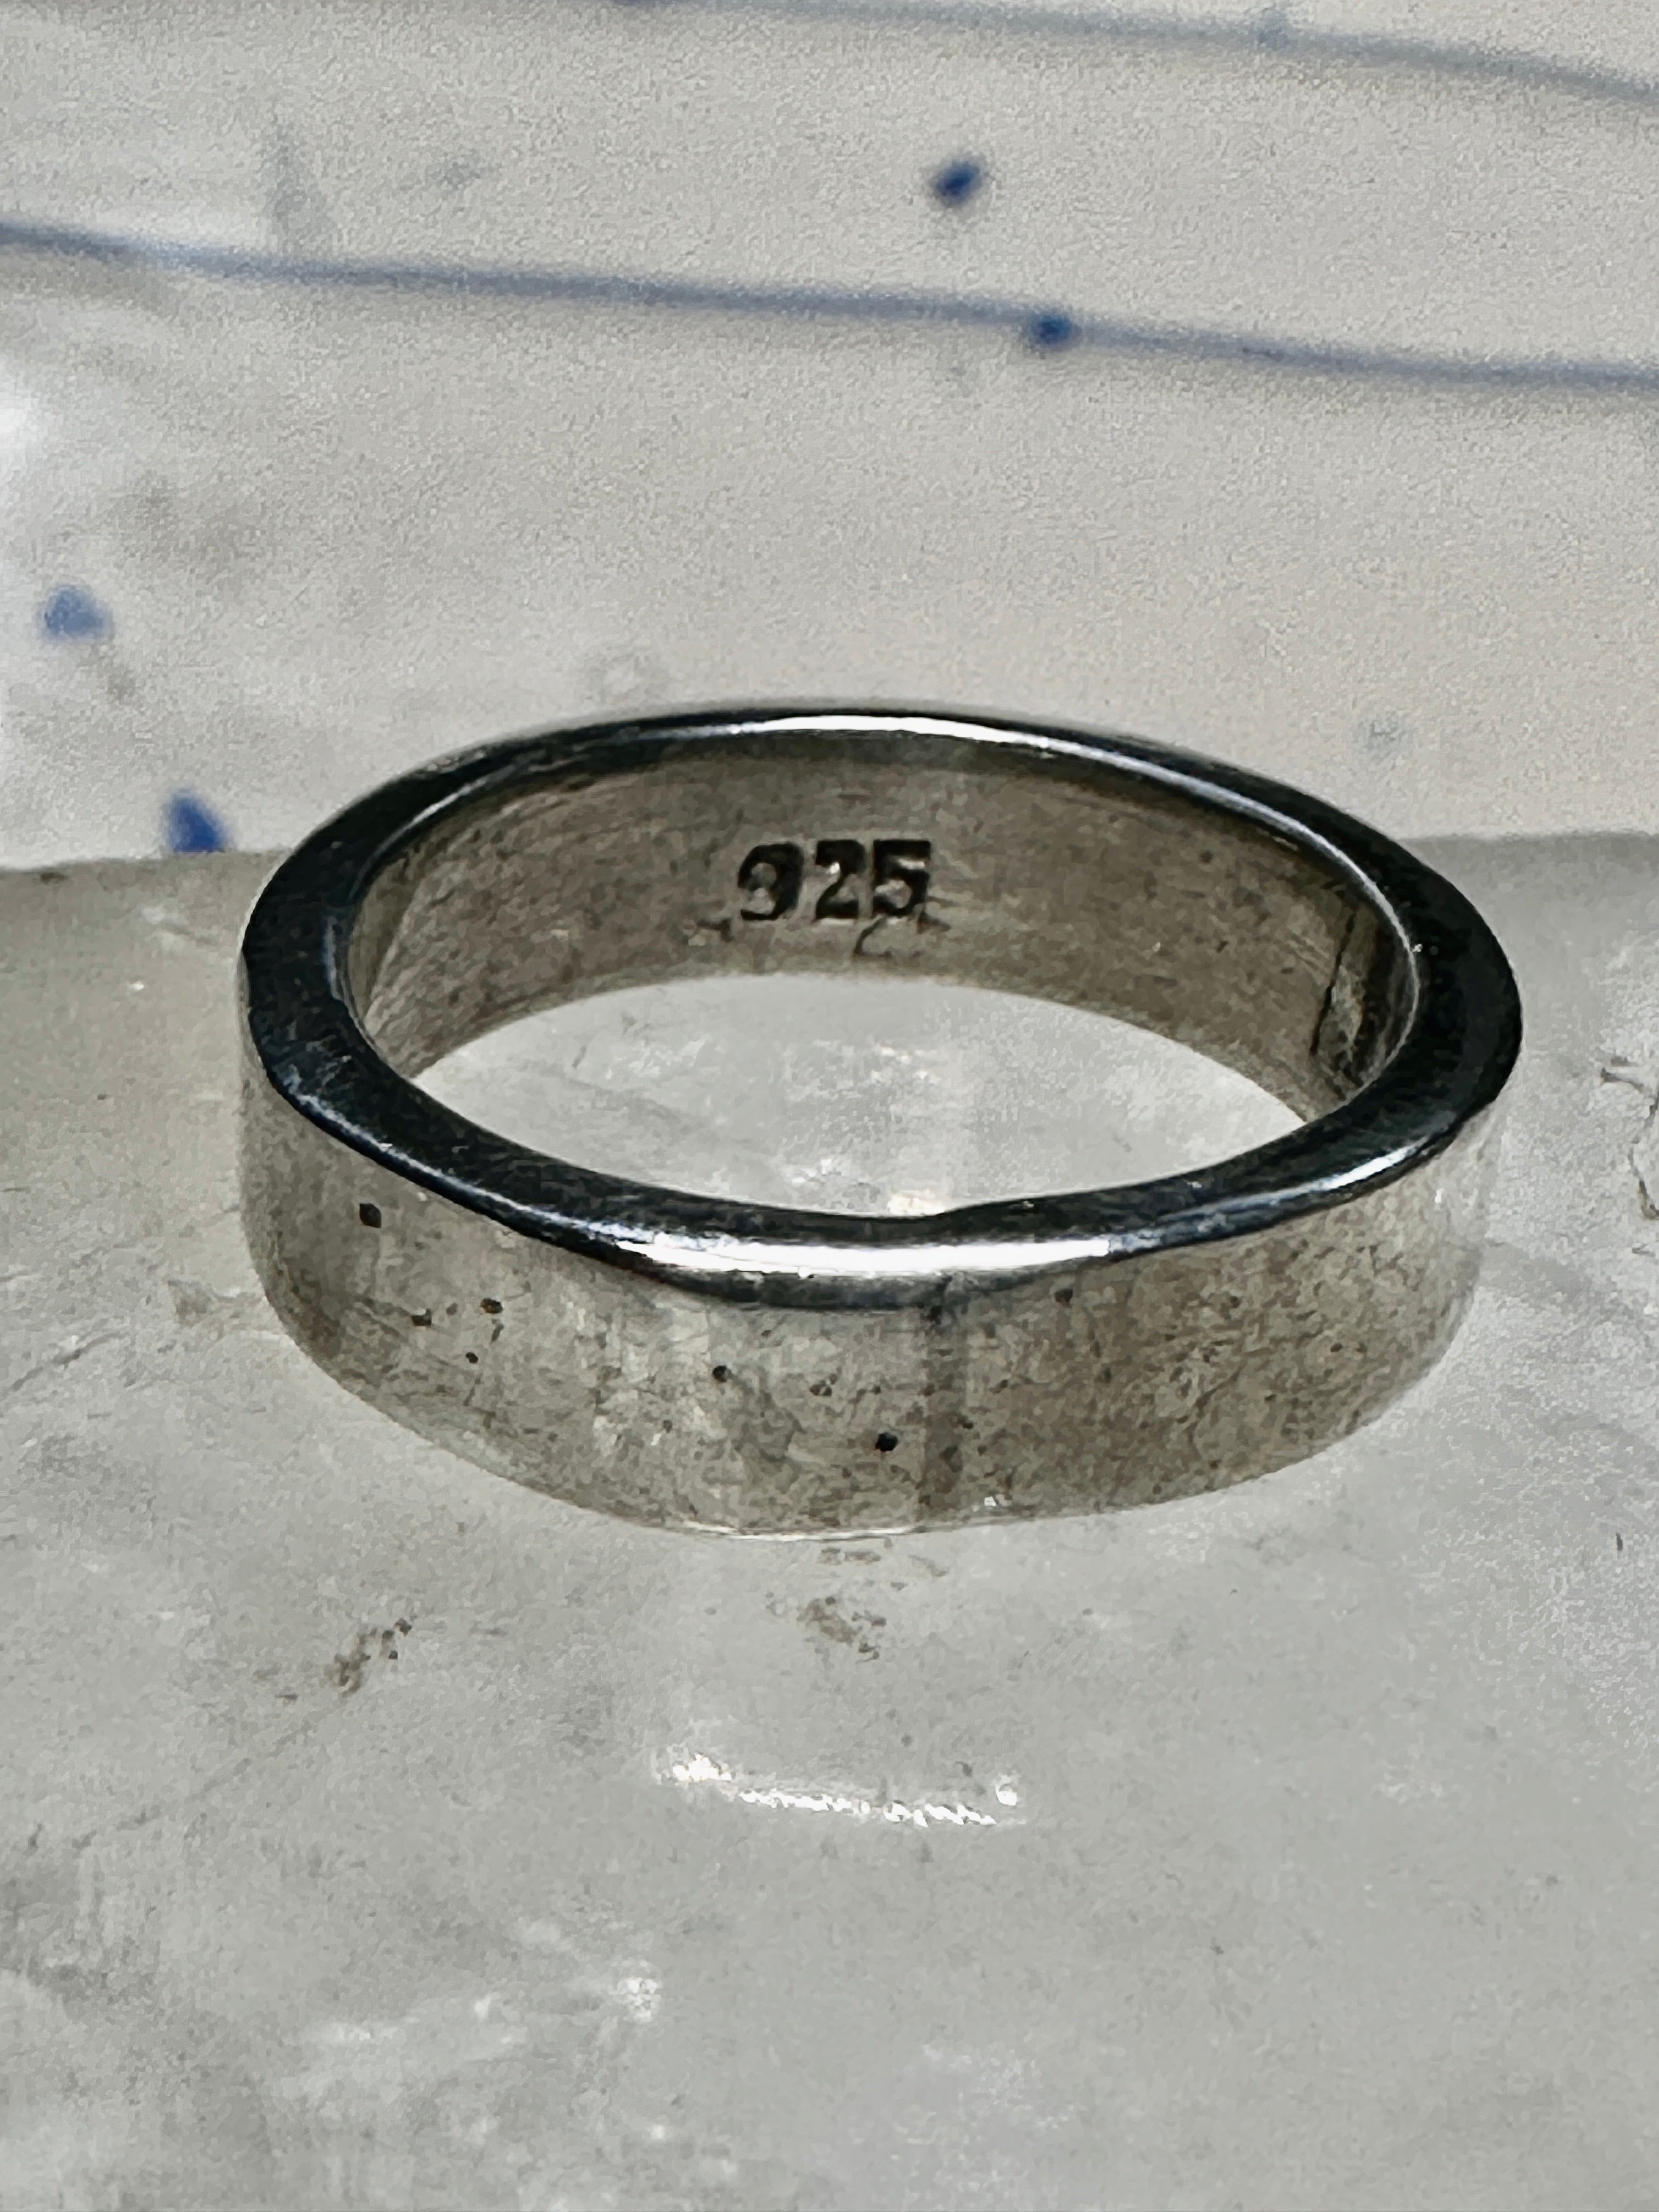 Plain Silver Ring (4.3 Grams) | Silver Images